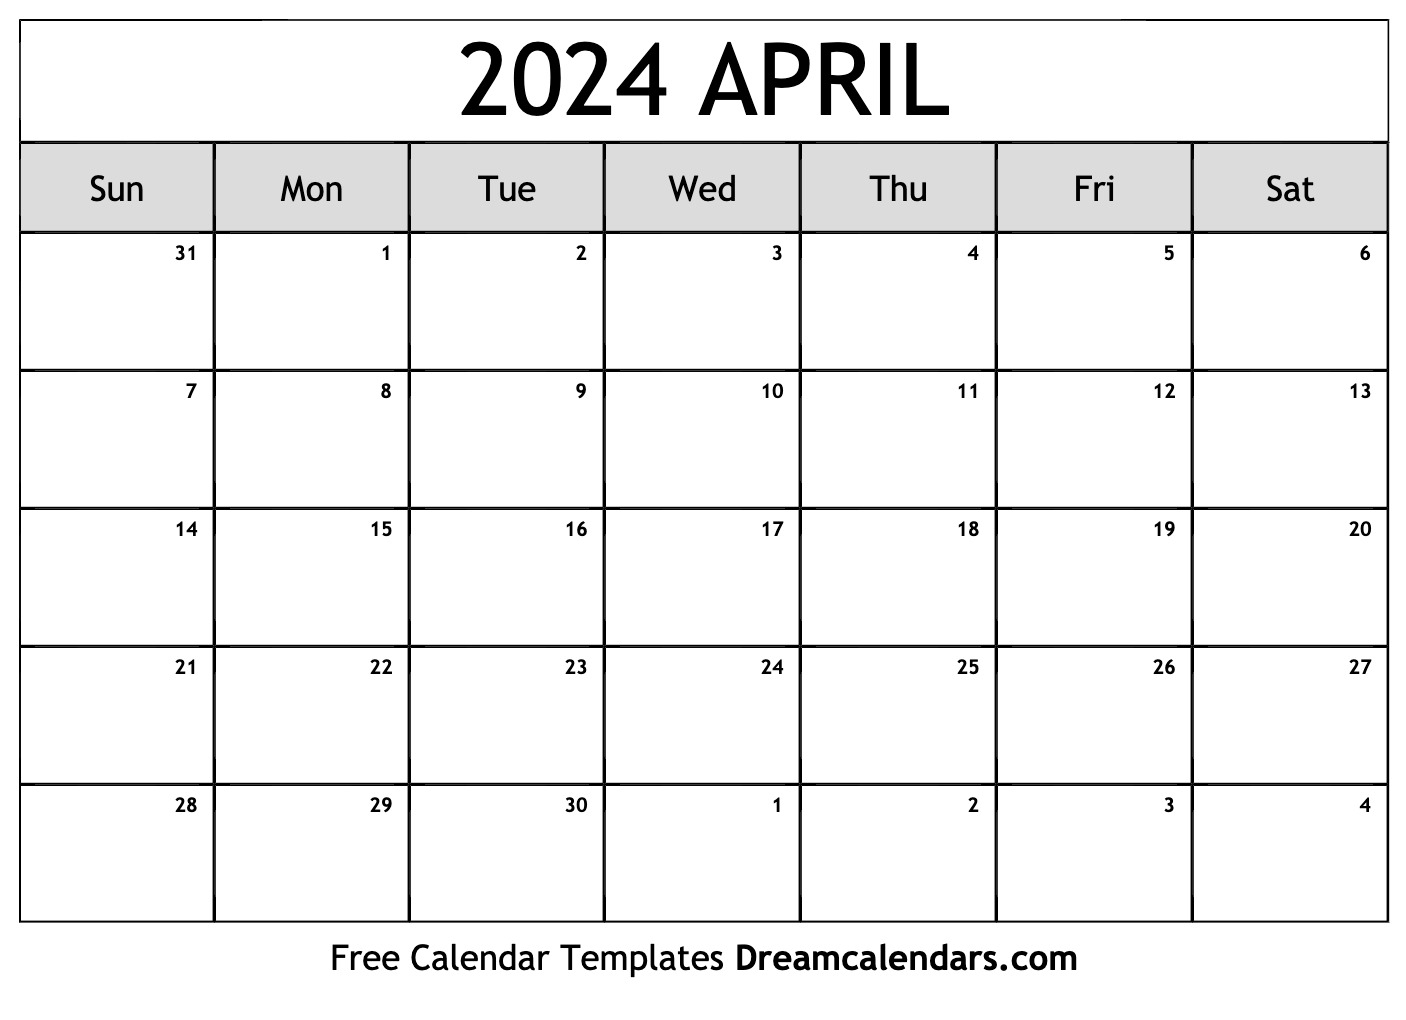 April 2024 Calendar | Free Blank Printable With Holidays intended for April 18 2024 Calendar